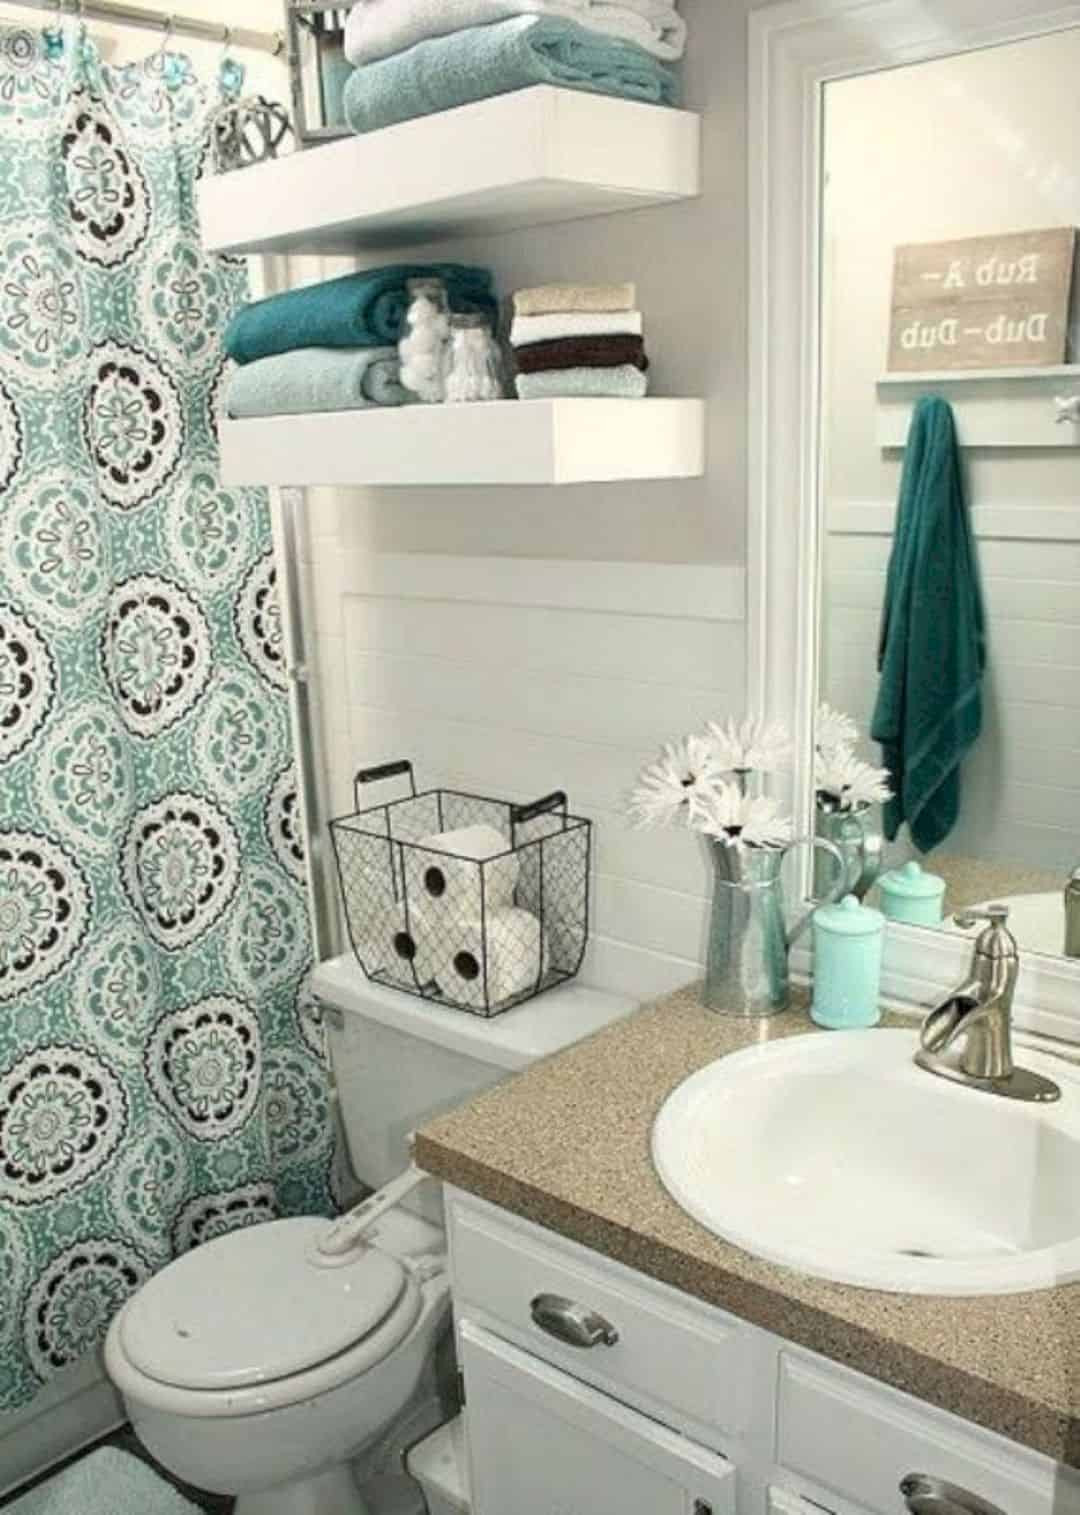 Images Of Bathroom Decor
 17 Awesome Small Bathroom Decorating Ideas